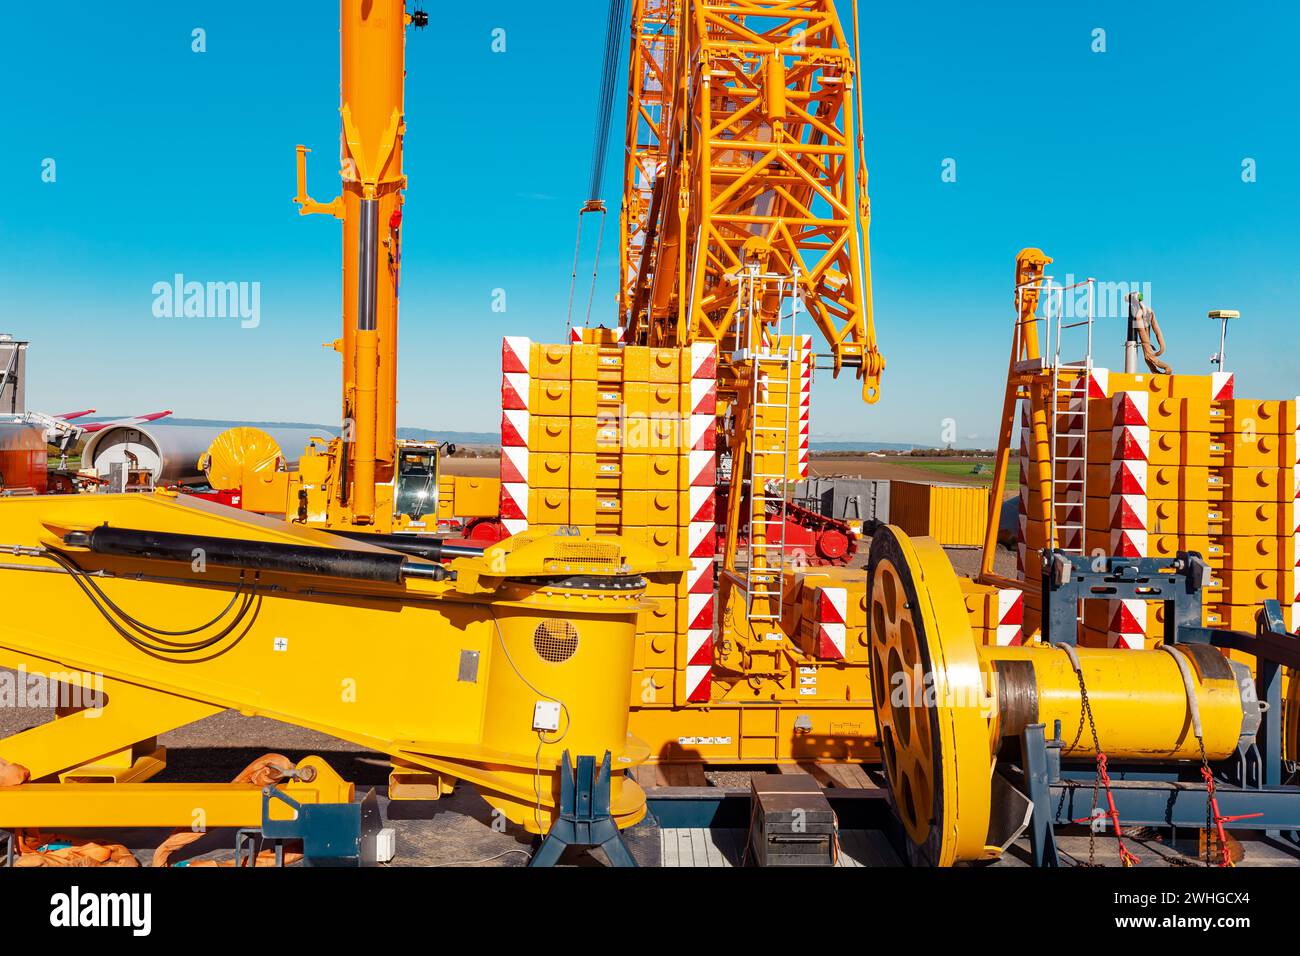 Machinery. Crawler crane standing on a construction site for Building and assembling a construction Stock Photo